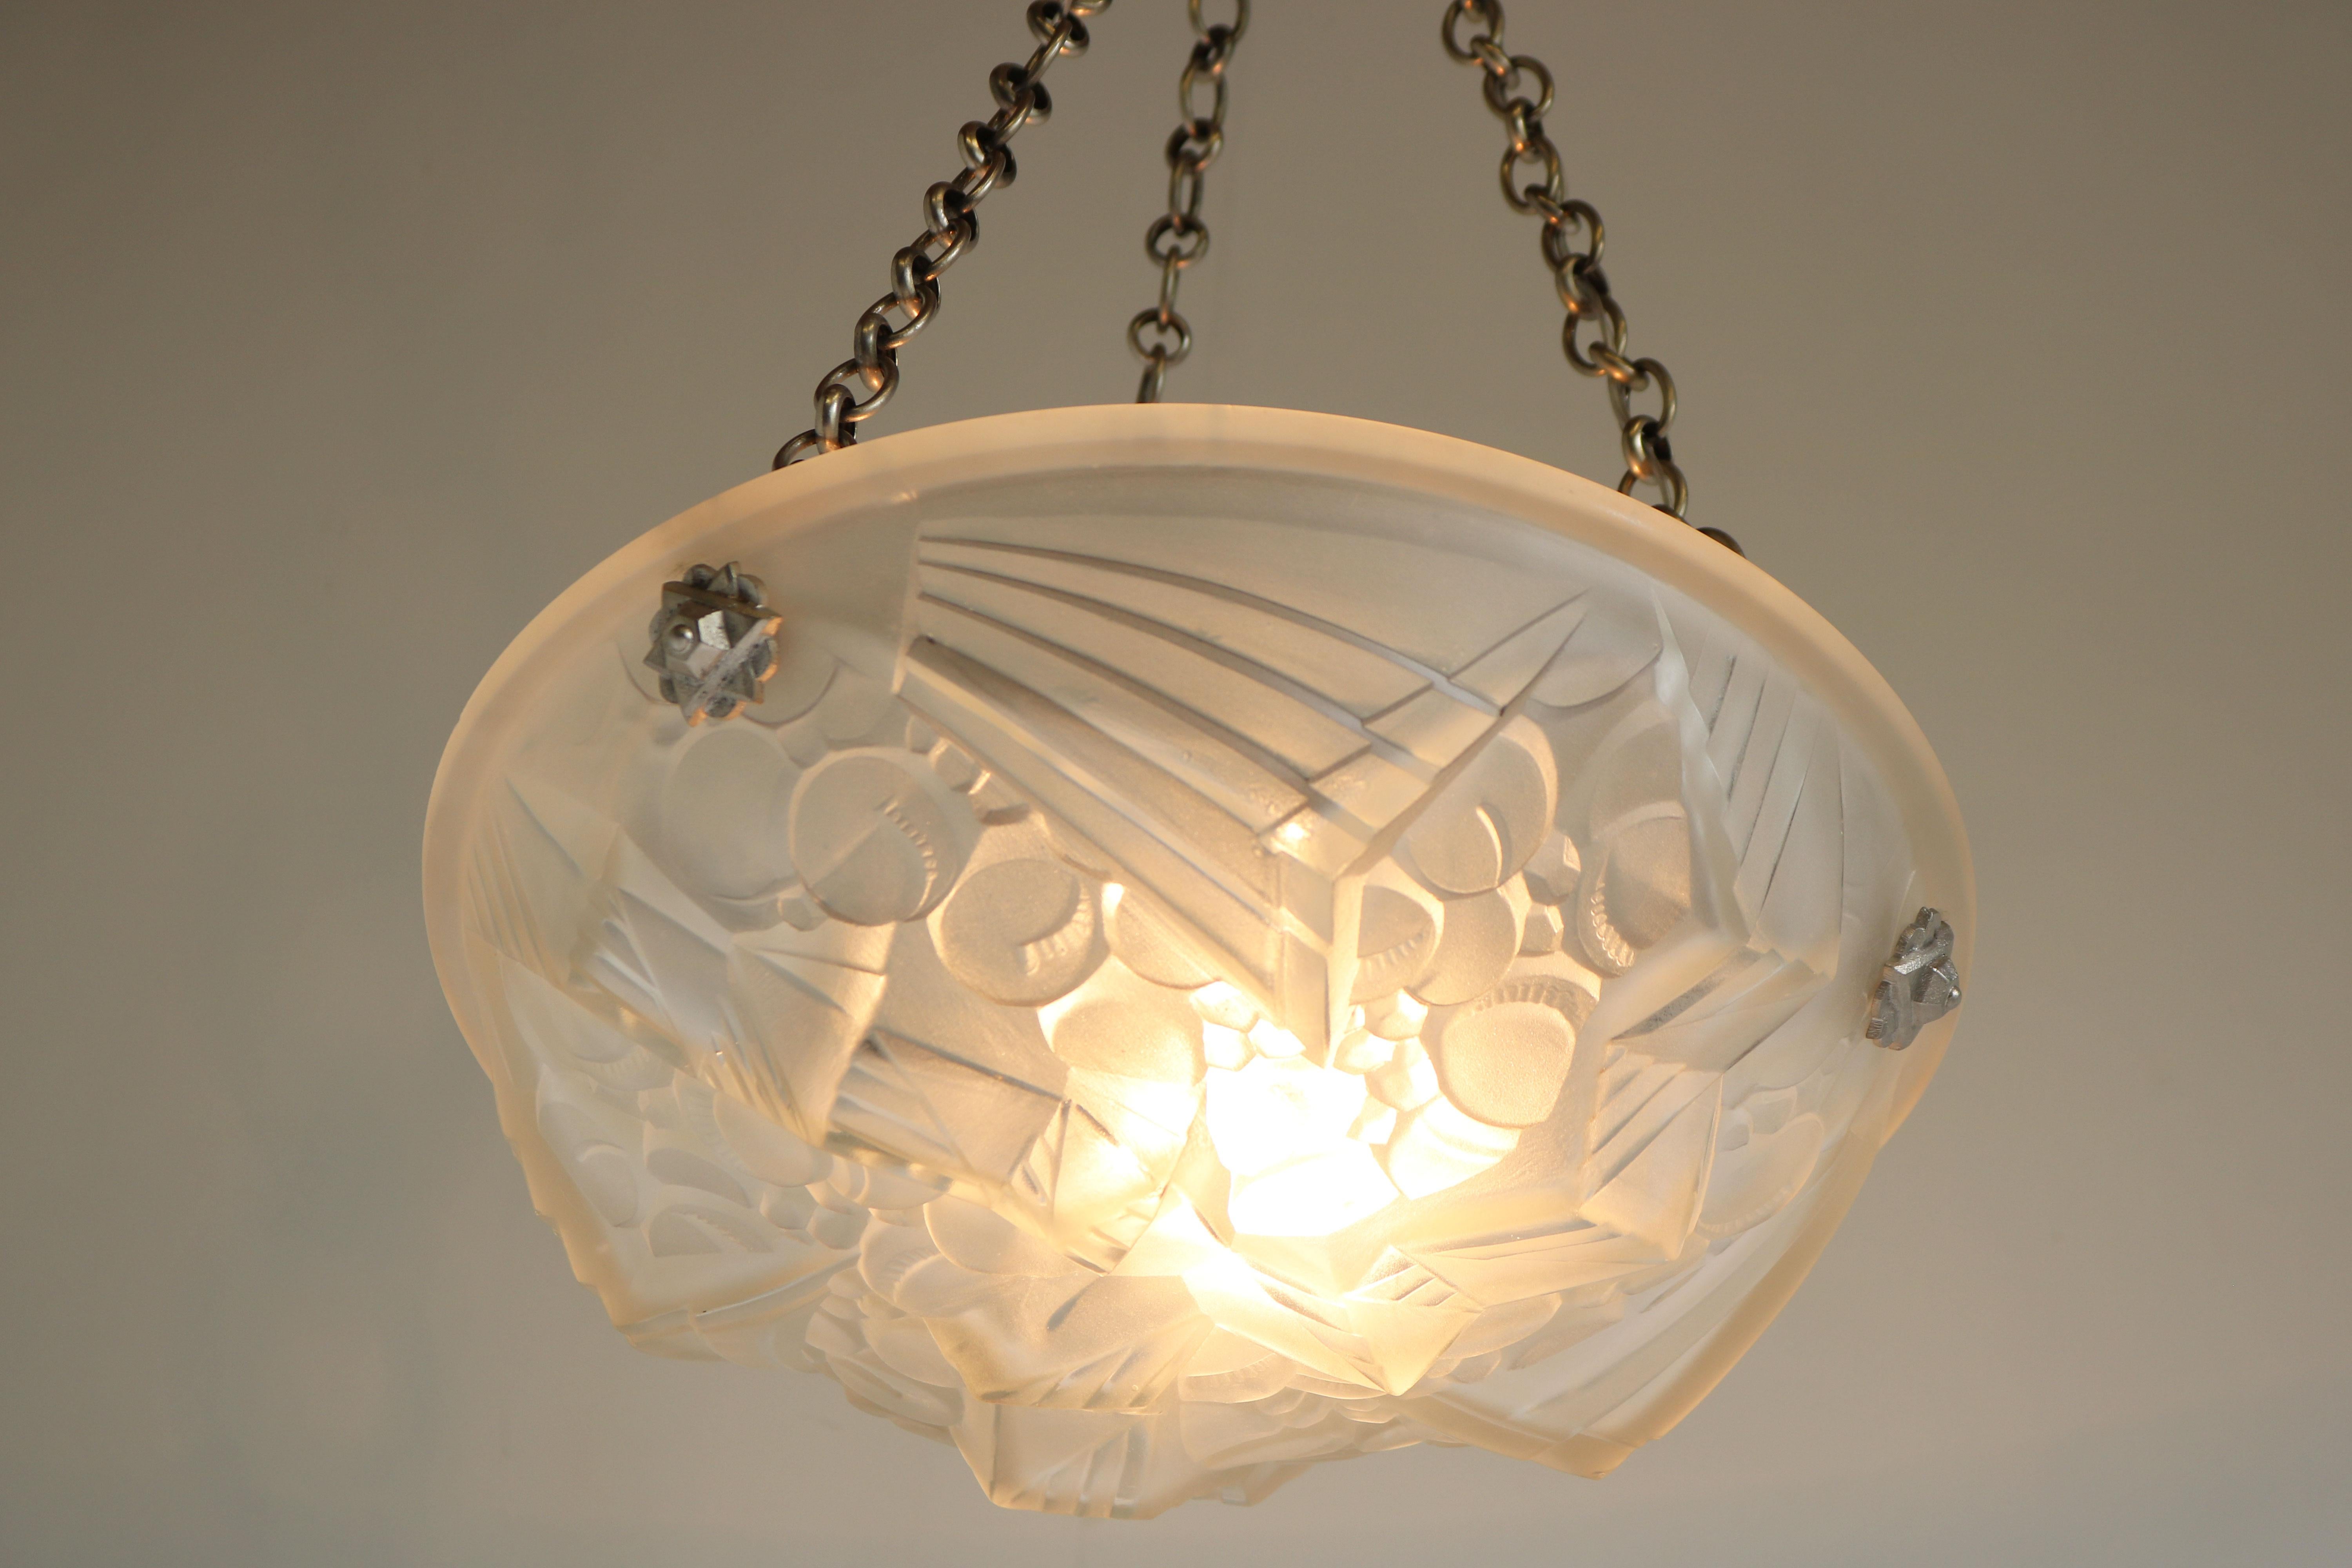 French Antique Art Deco Pendant Light Chandelier by Mouynet Design 1920 White For Sale 3